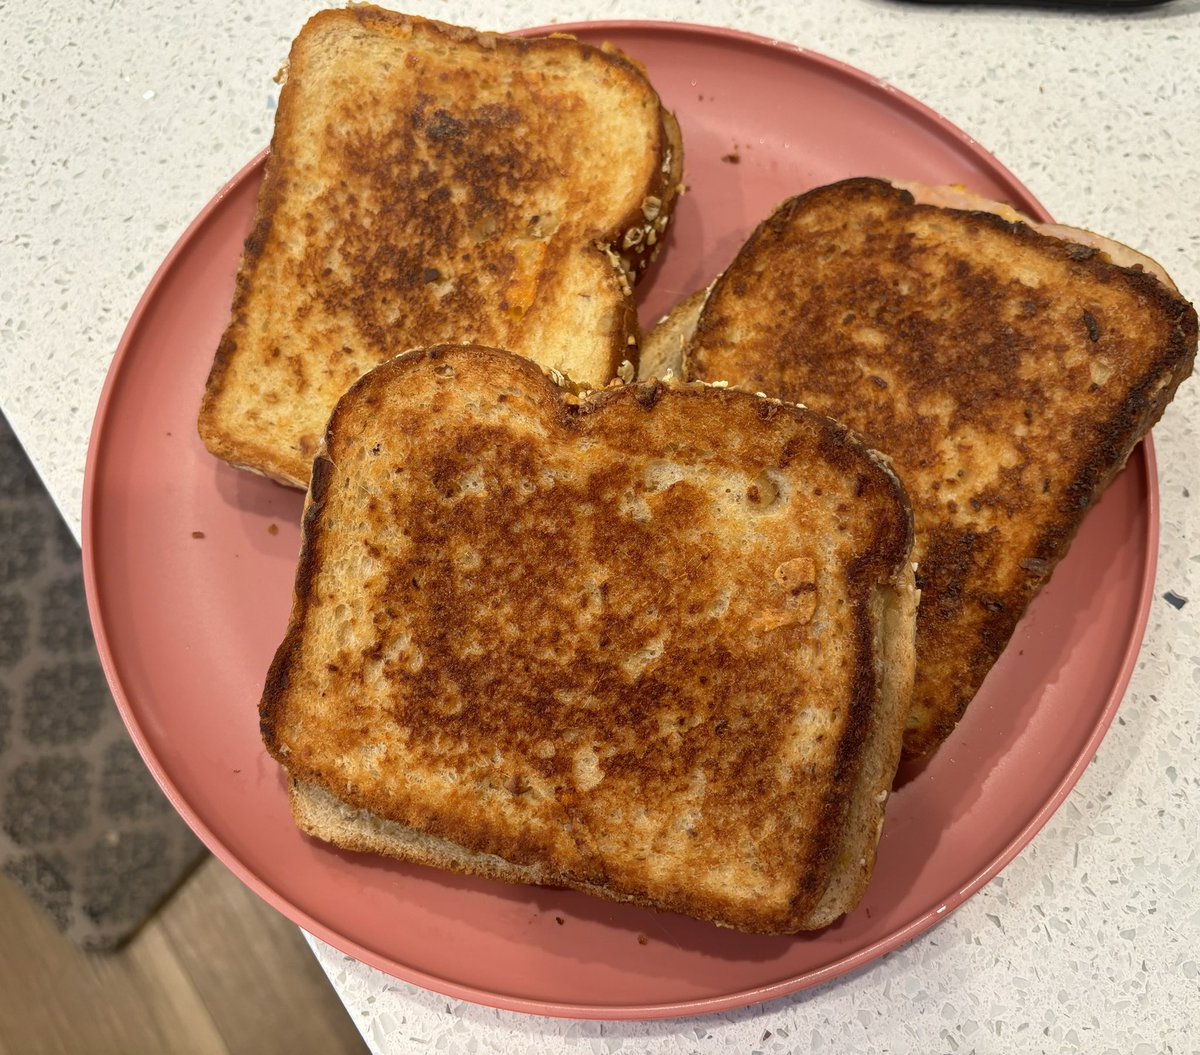 As someone with ADHD who constantly gets distracted & burns grilled cheese, I’m genuinely proud of these 🥹